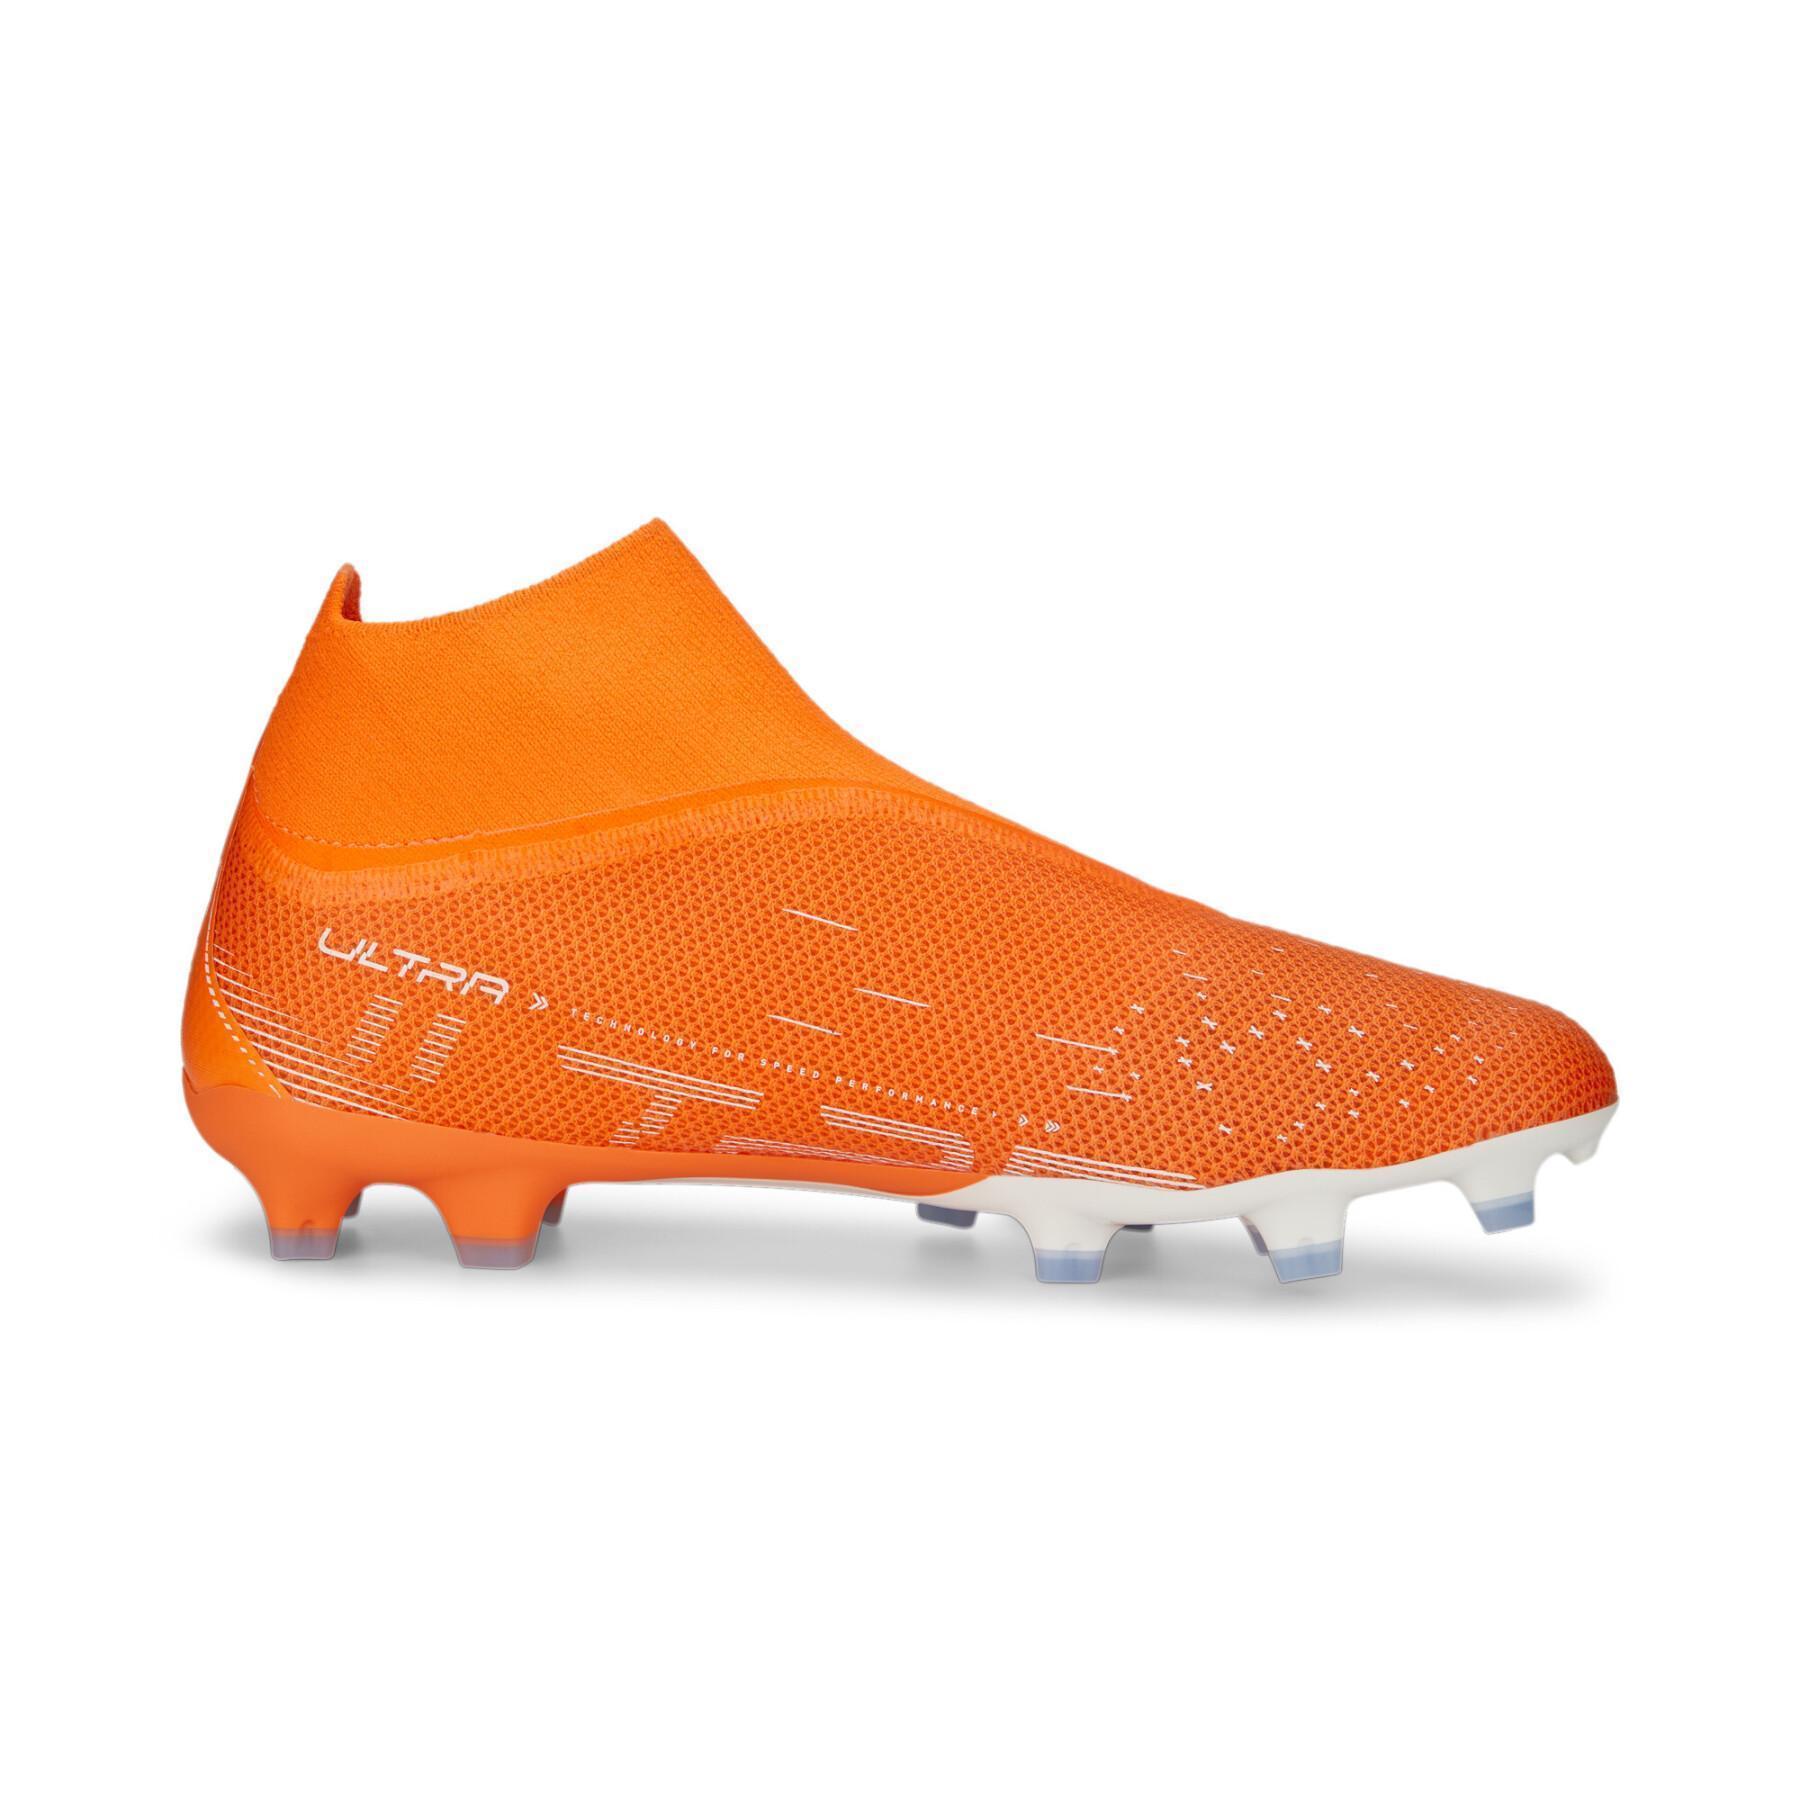 Soccer shoes without laces Puma Ultra Match FG/AG